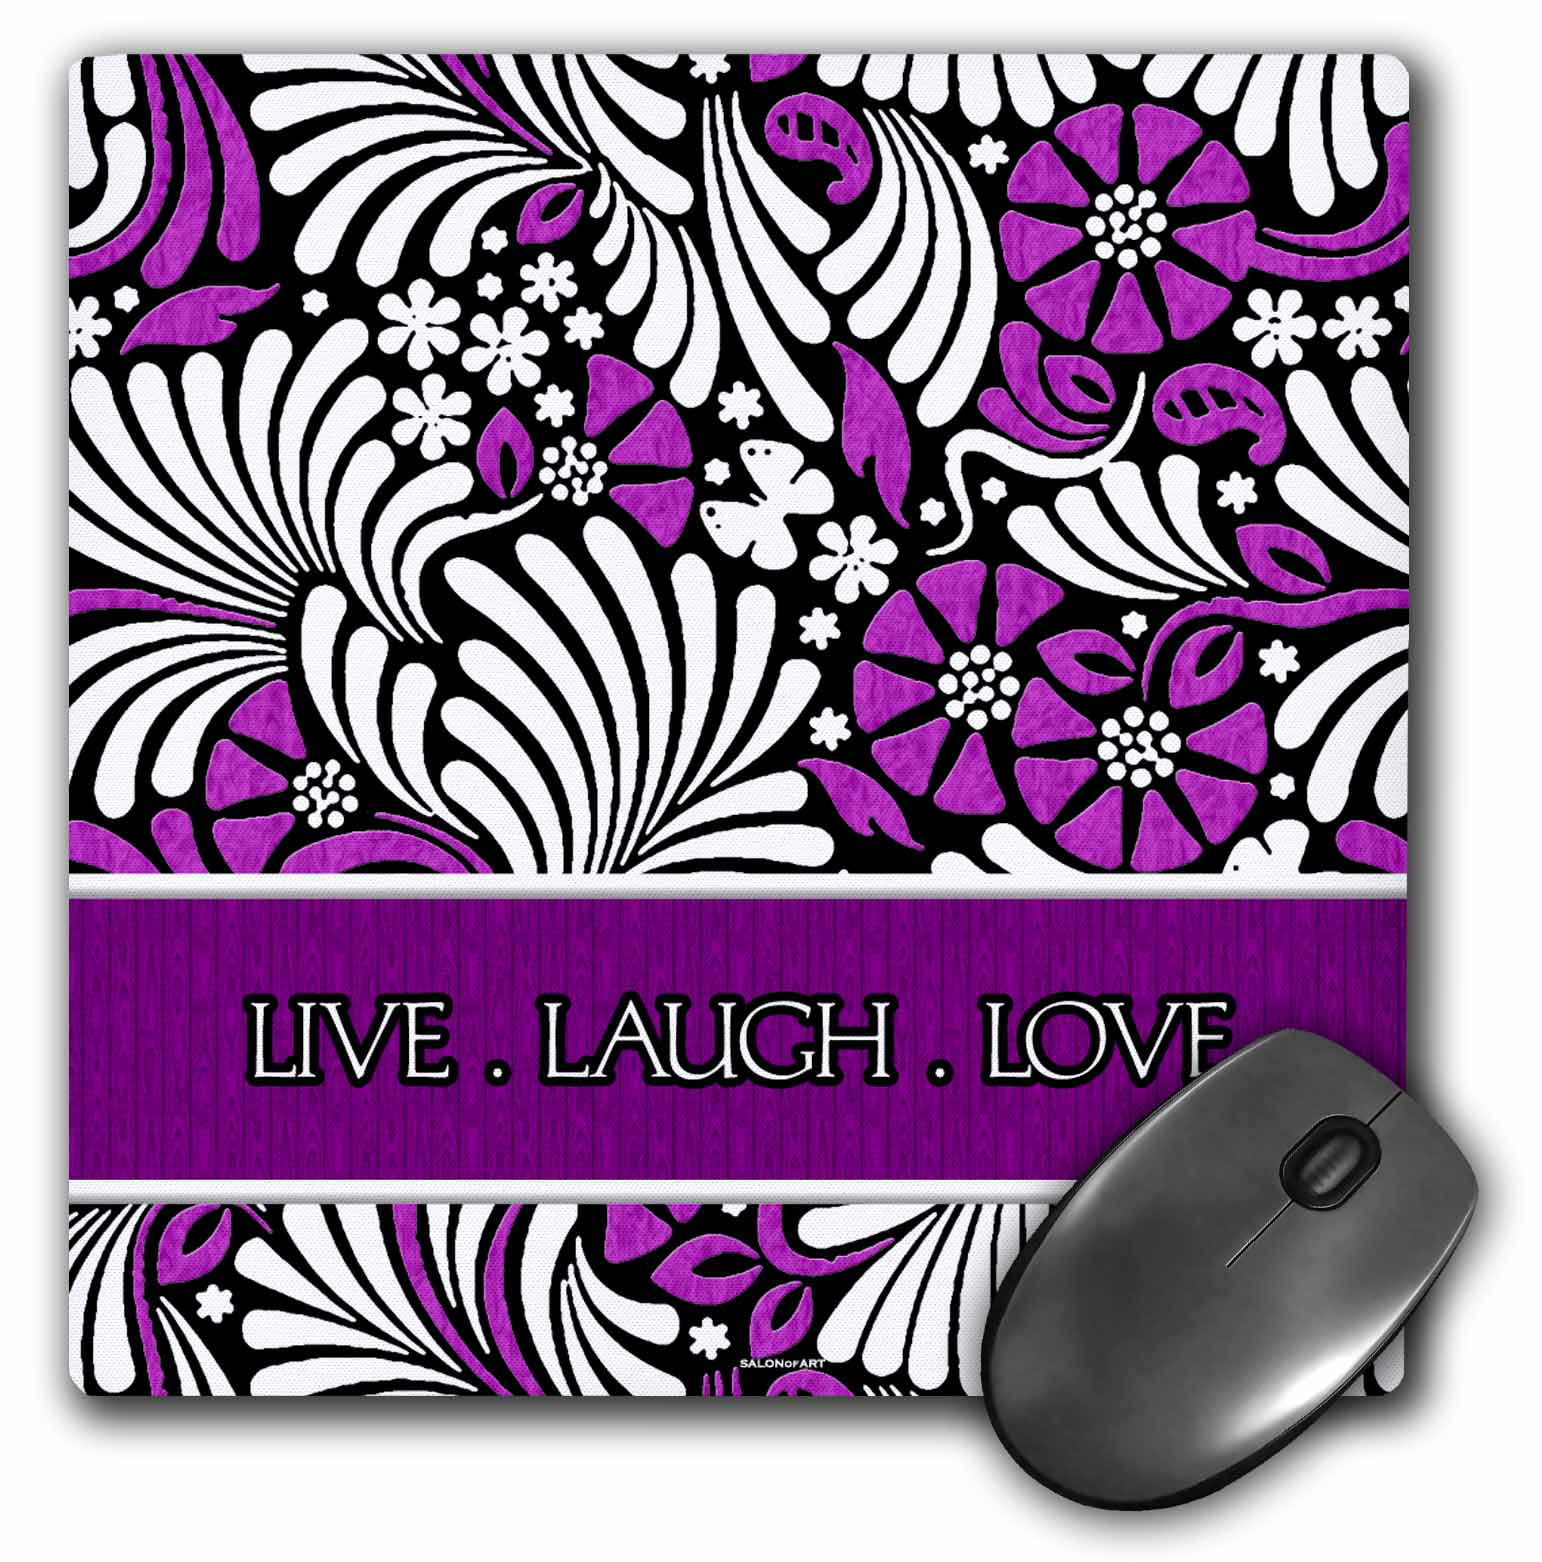 3dRose Live Laugh Love in Purple, Mouse Pad, 8 by 8 inches - Walmart.com